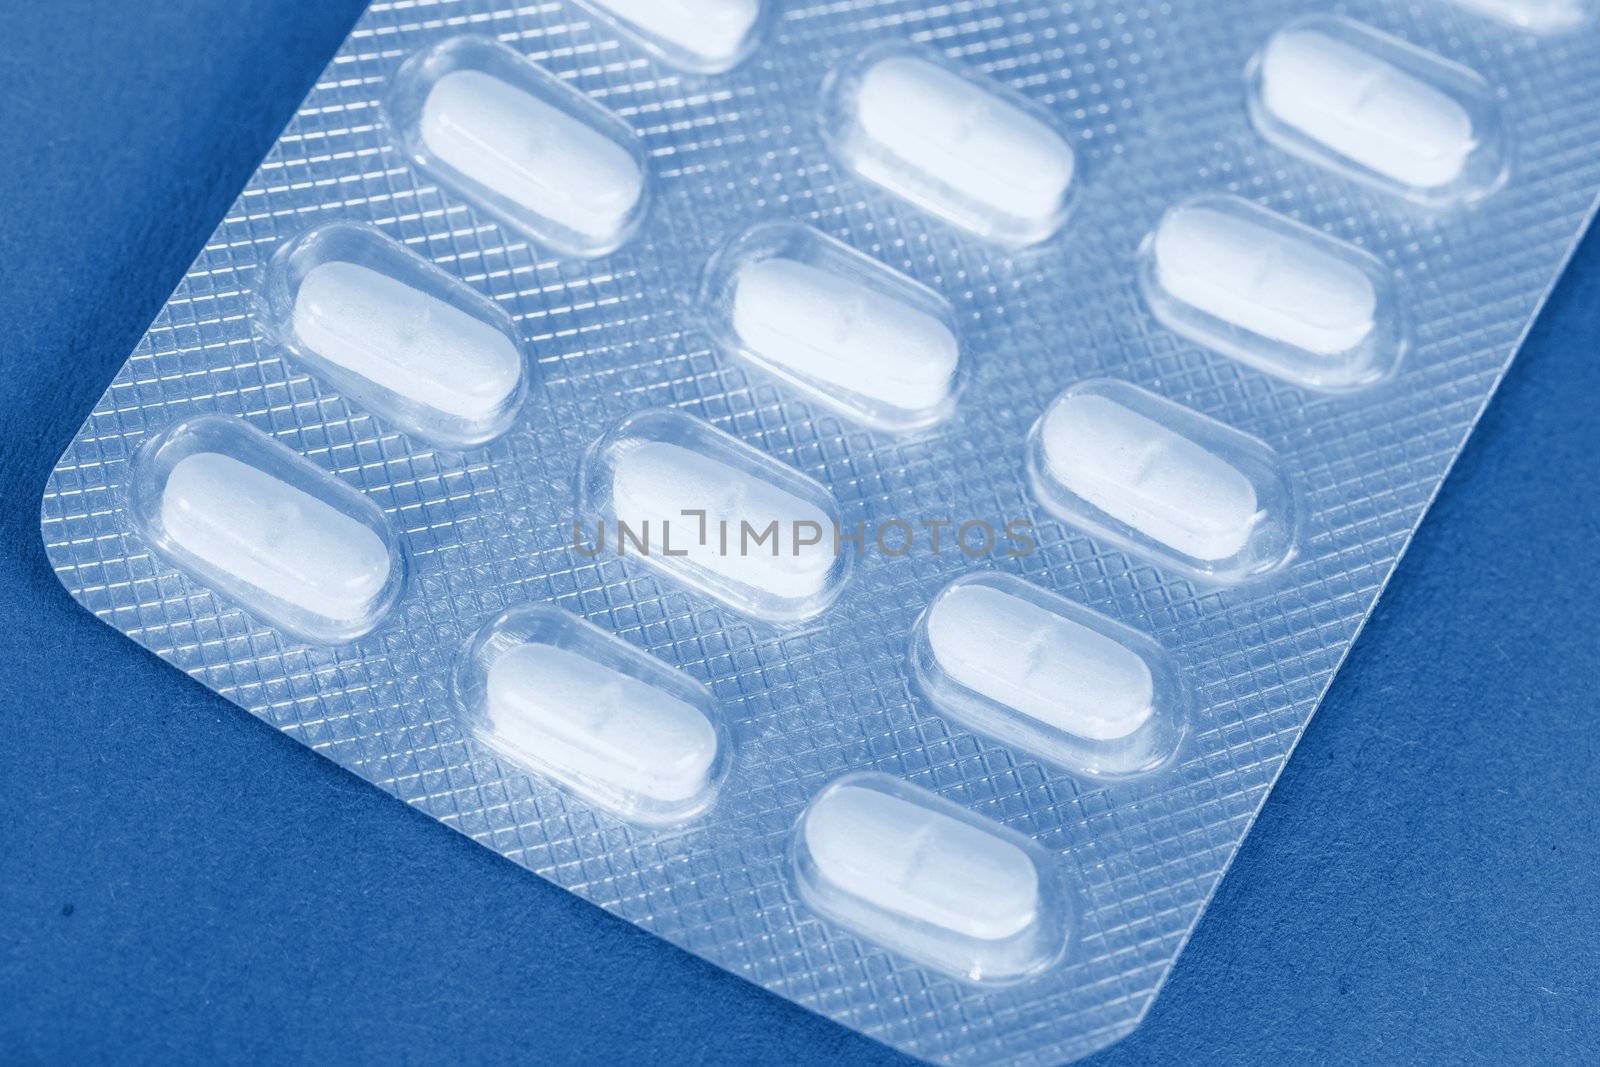 Closeup of foil wrapped tablets